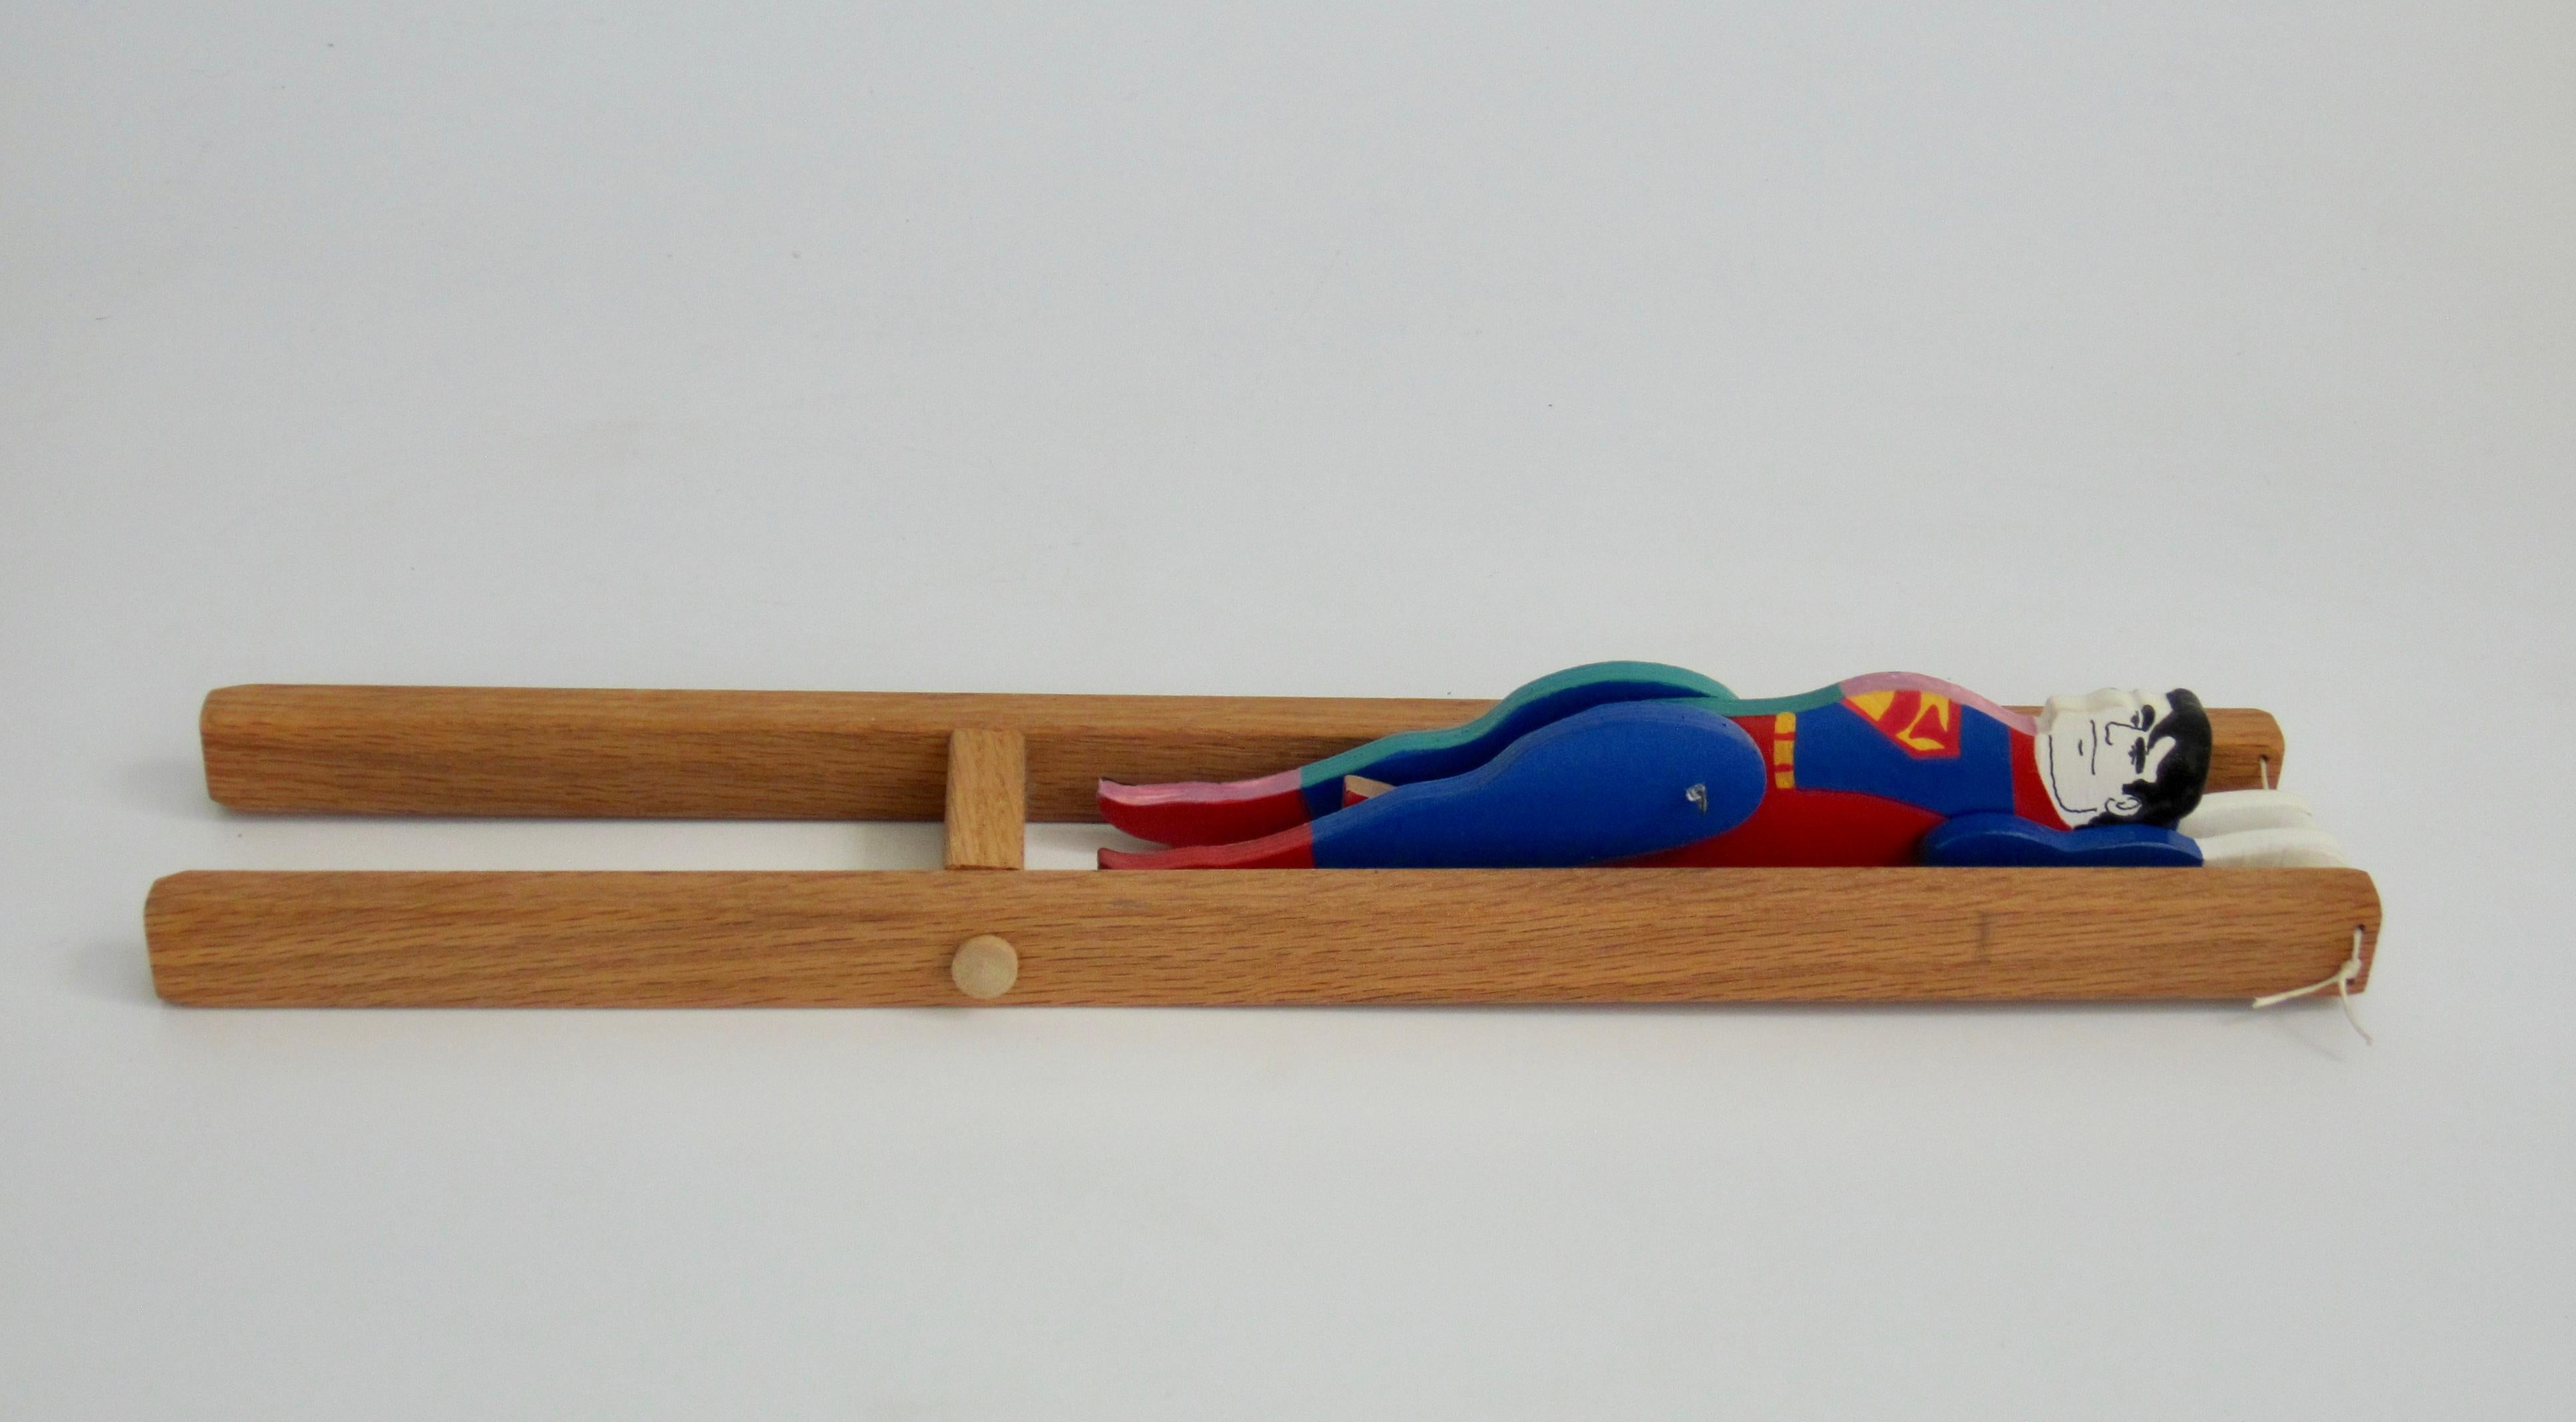 Superman/Clark Kent Wooden Trapeze Artist Toy with Graffiti Phone Booth For Sale 3